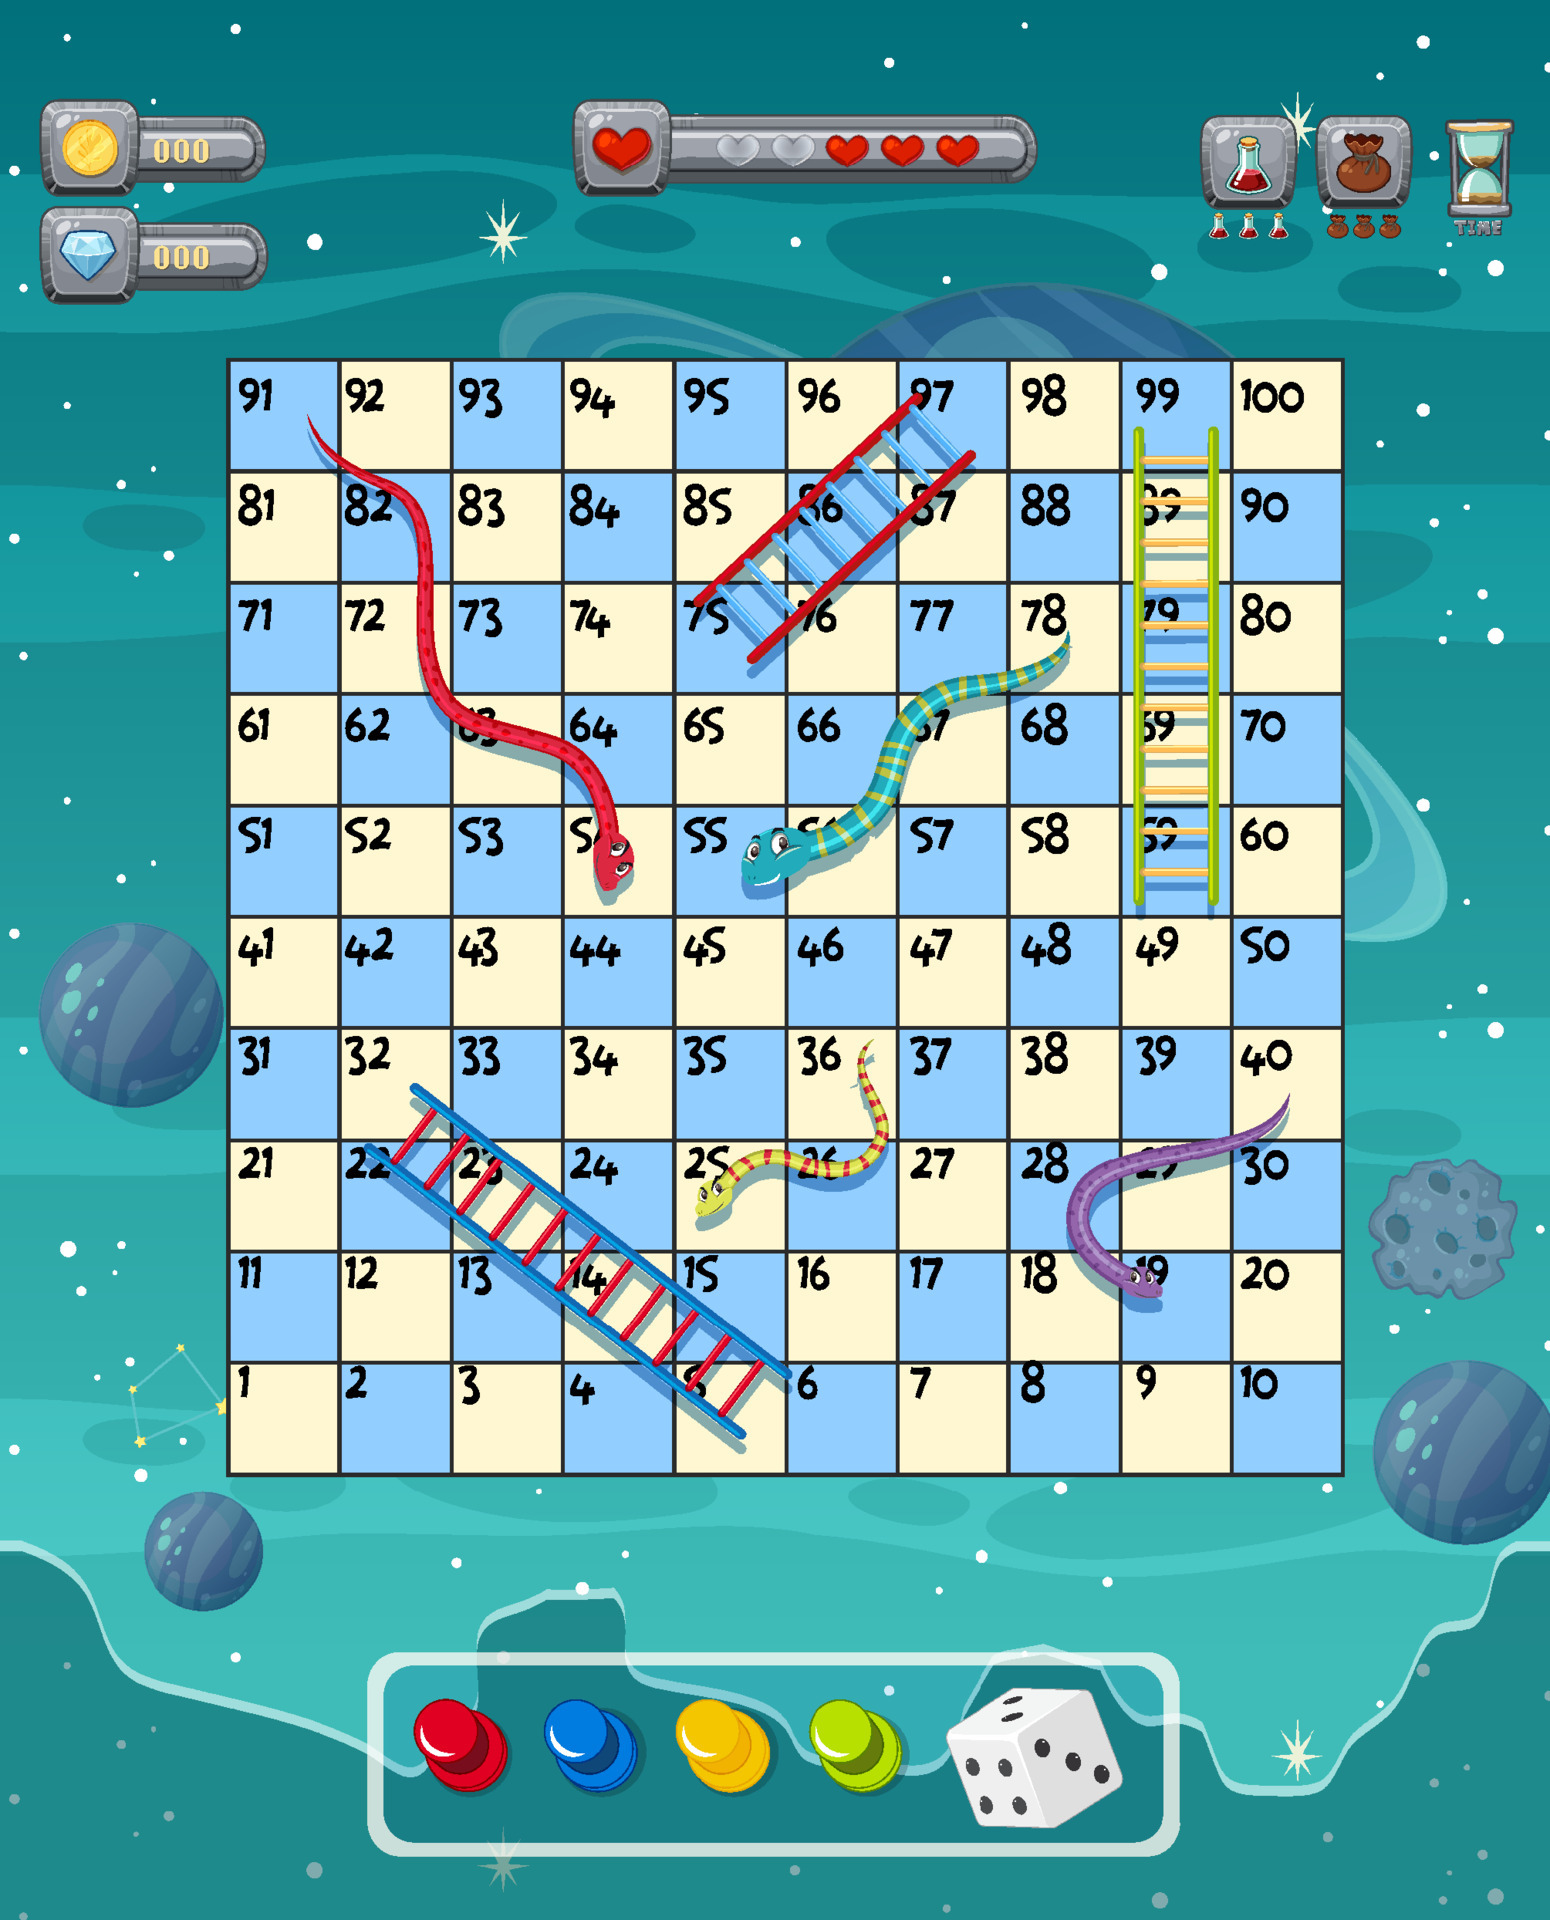 Jogue Grátis Snakes and Ladders